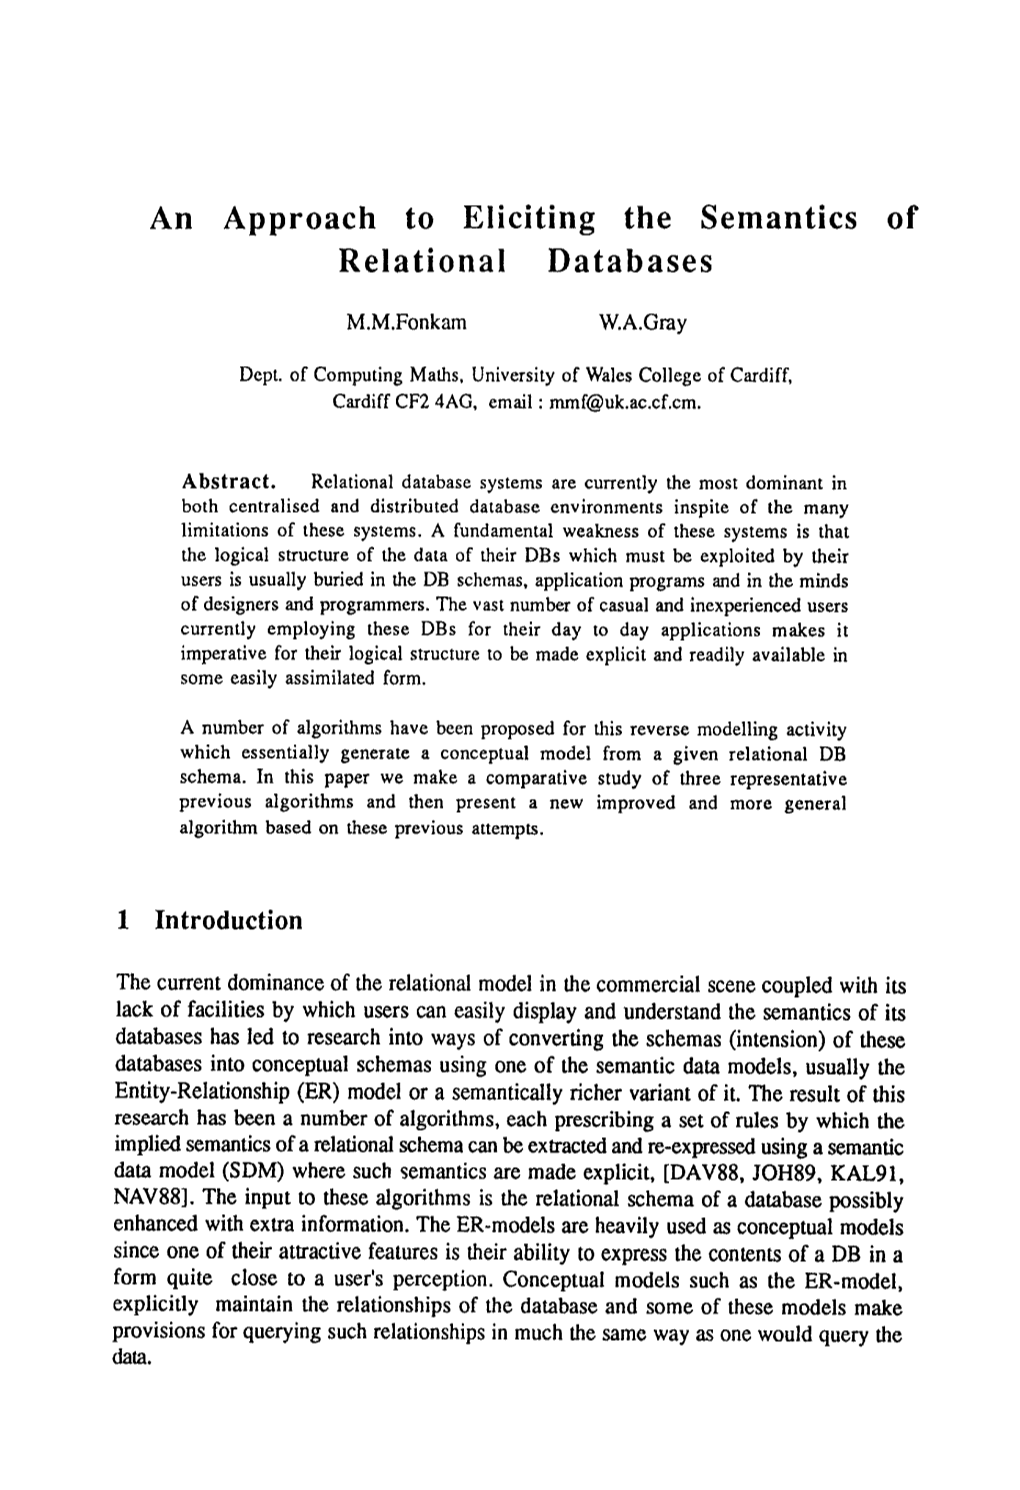 An Approach to Eliciting the Semantics of Relational Databases